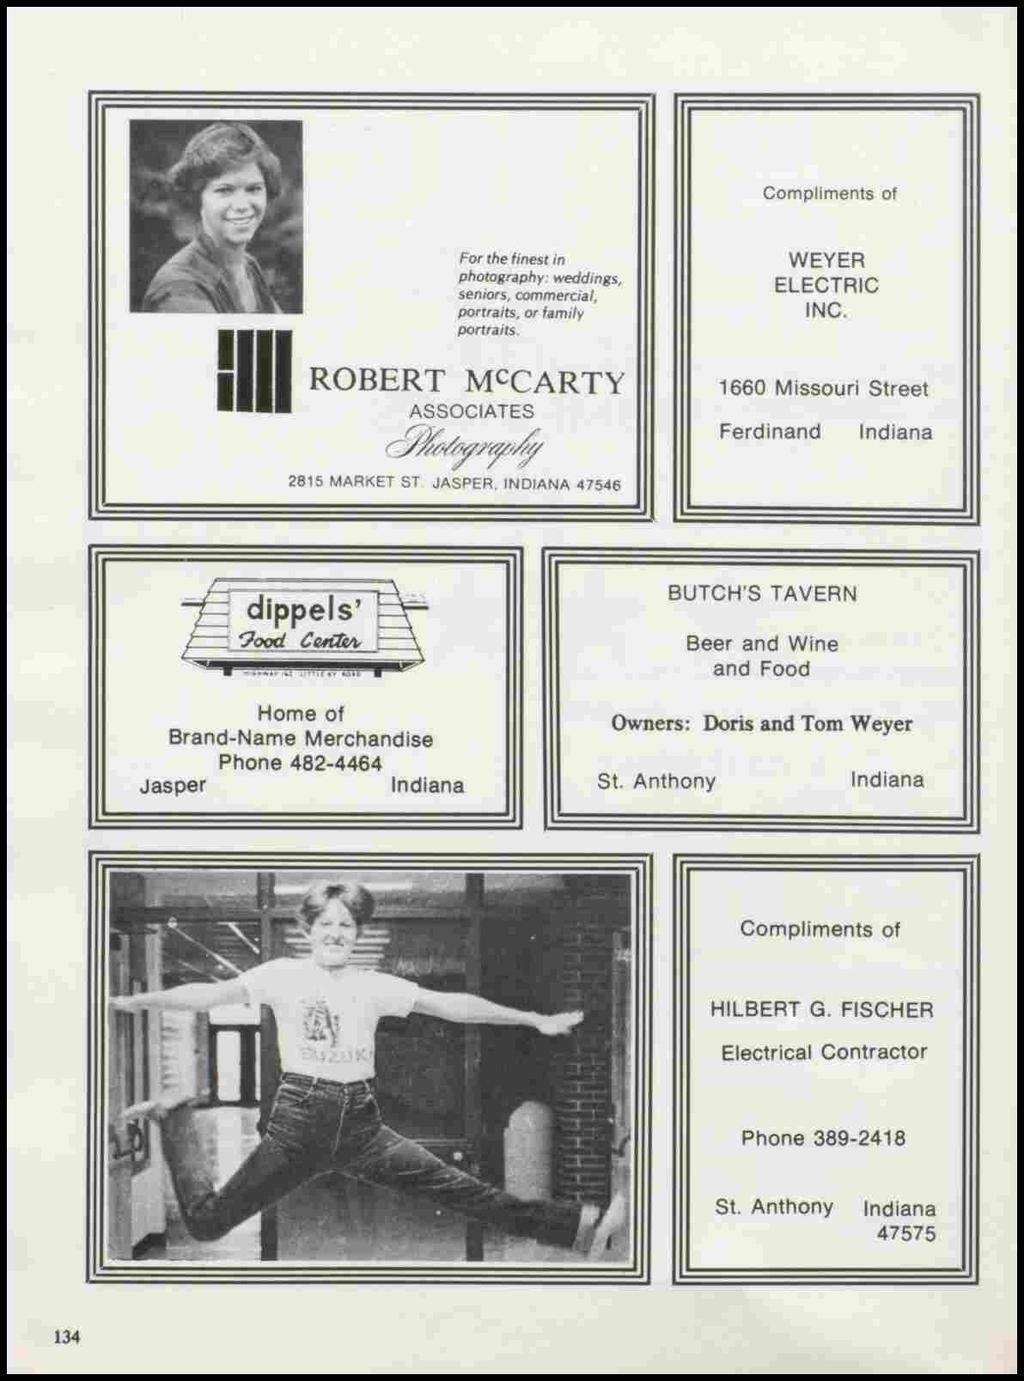 Compliments of II II For the finest in photography: weddings, seniors, commercial, portraits, or family portraits. ROBERT MCCARTY ASSOCIATES c9lf«ty/~/j 2815 MARKET ST.